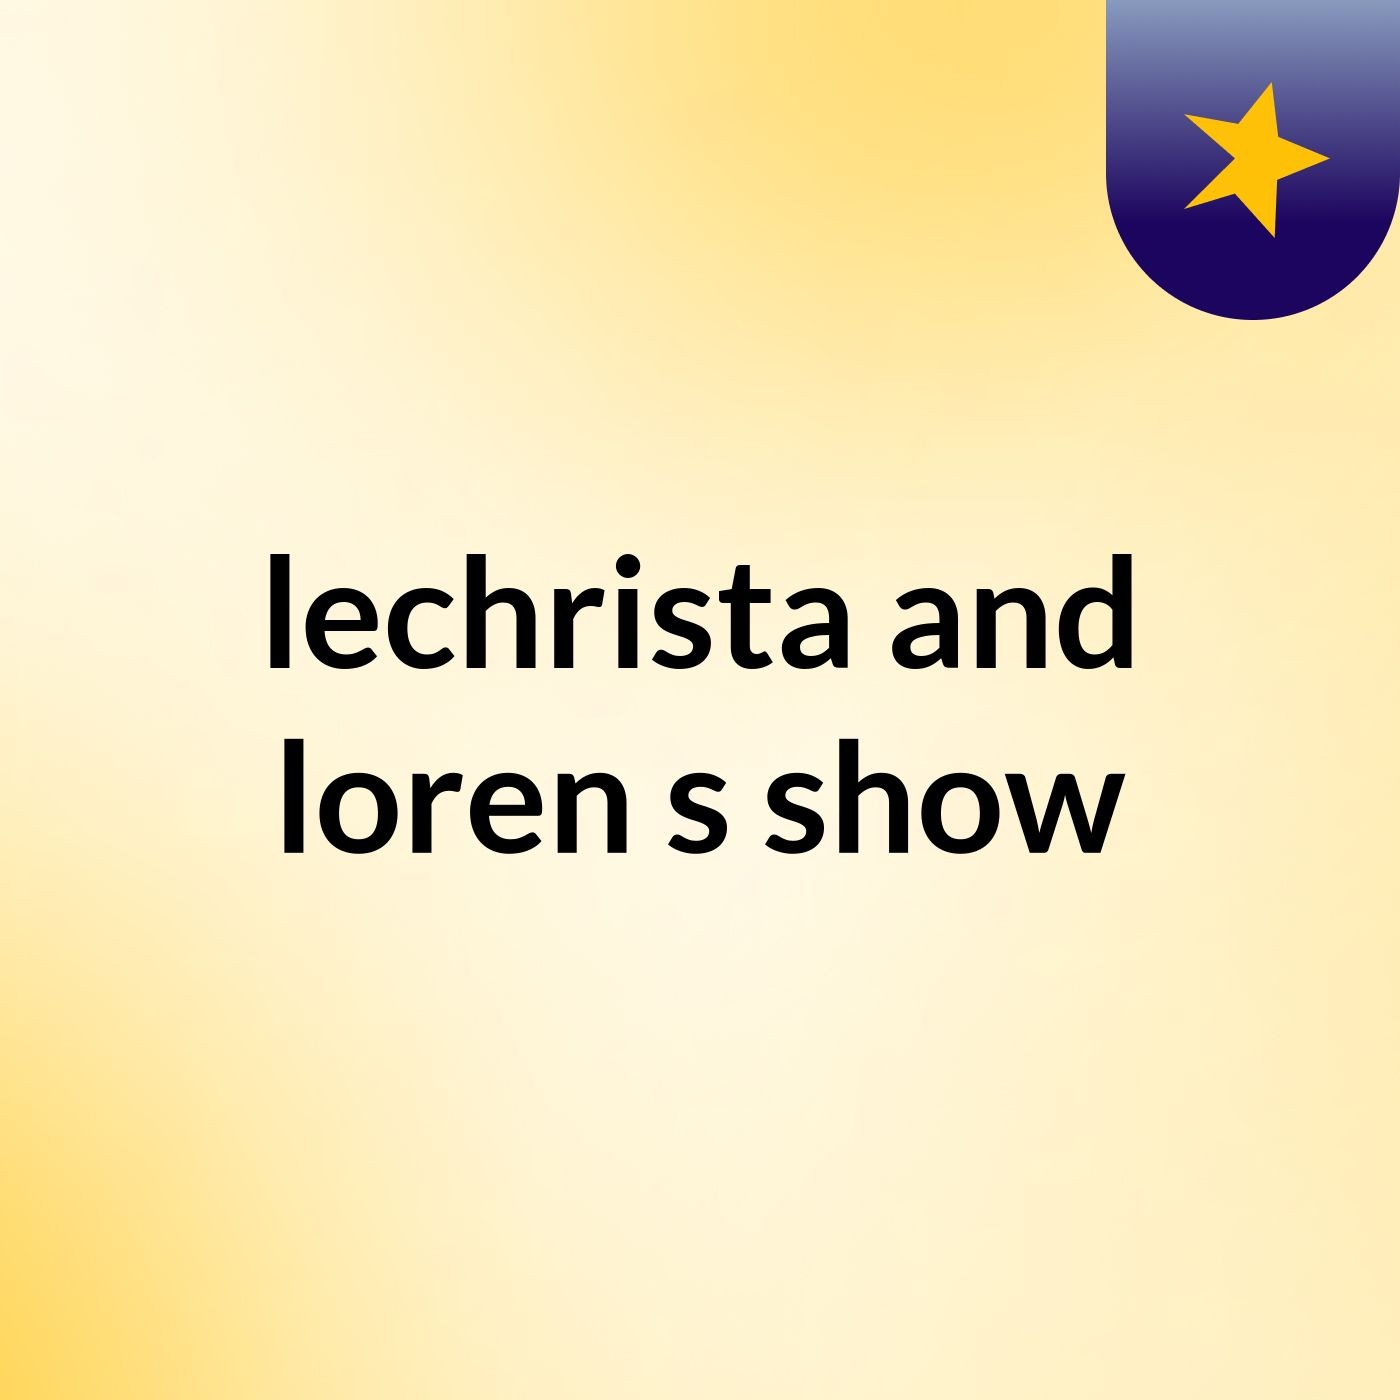 lechrista and loren's show